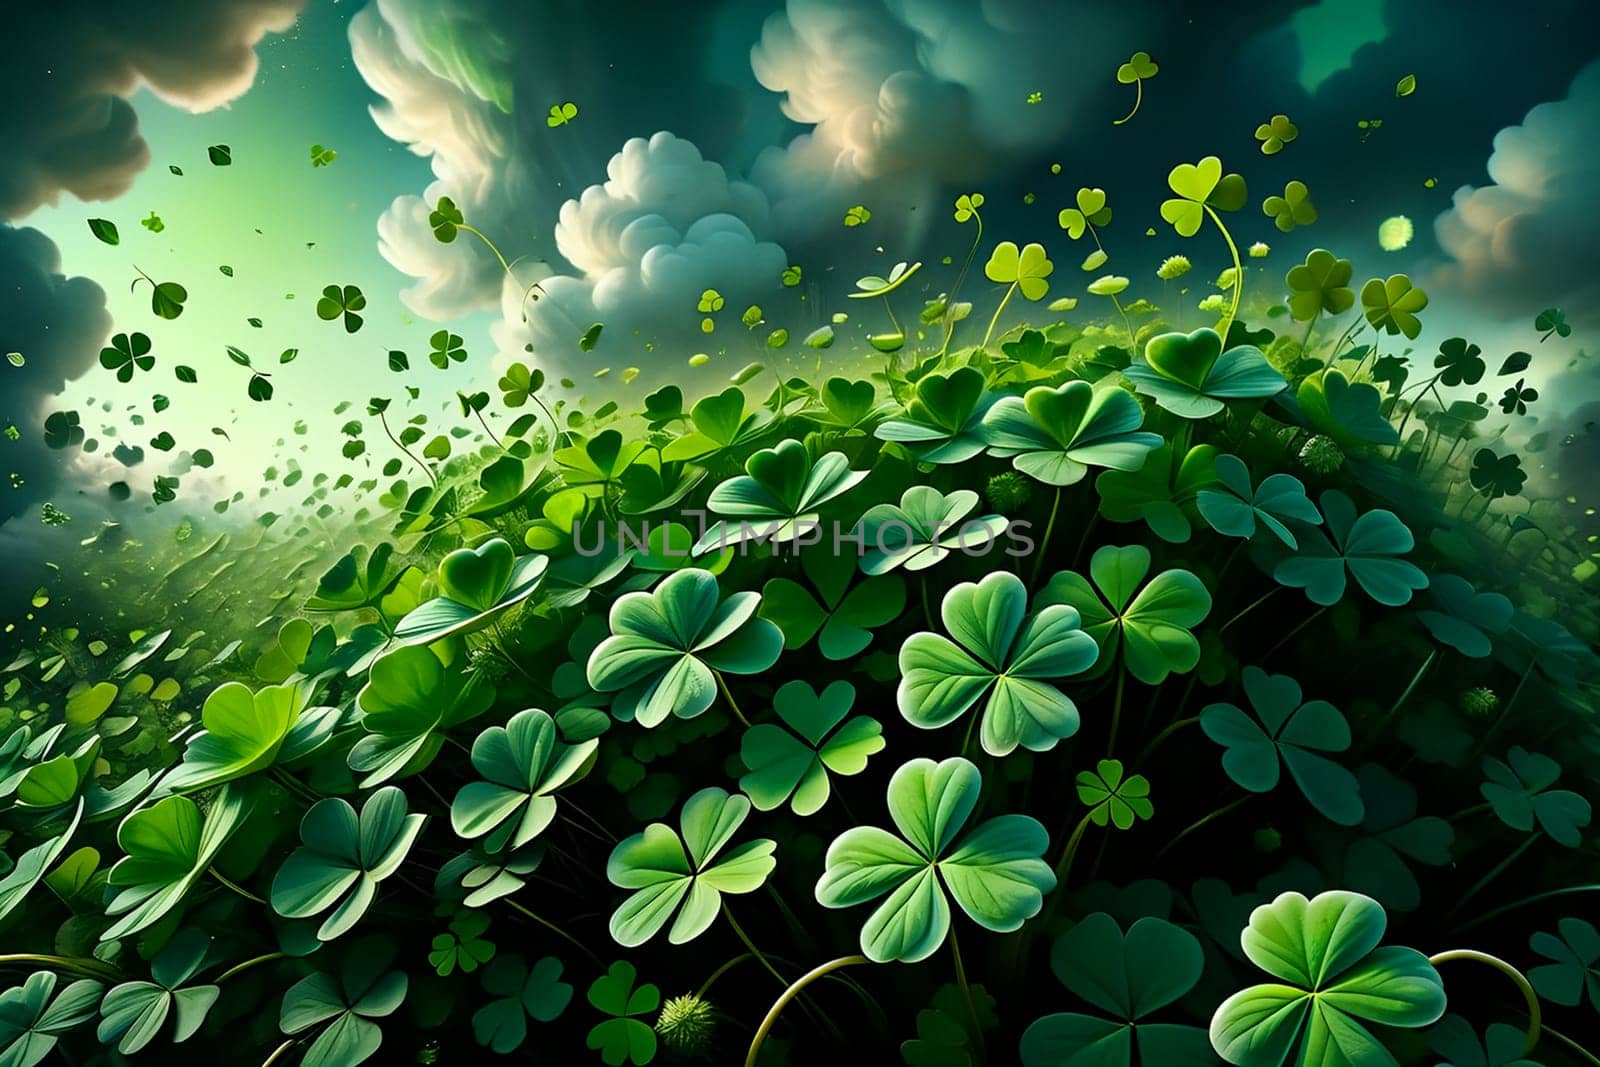 Abstract green background for St. Patrick's Day, decorated with shamrock leaves. by Rawlik